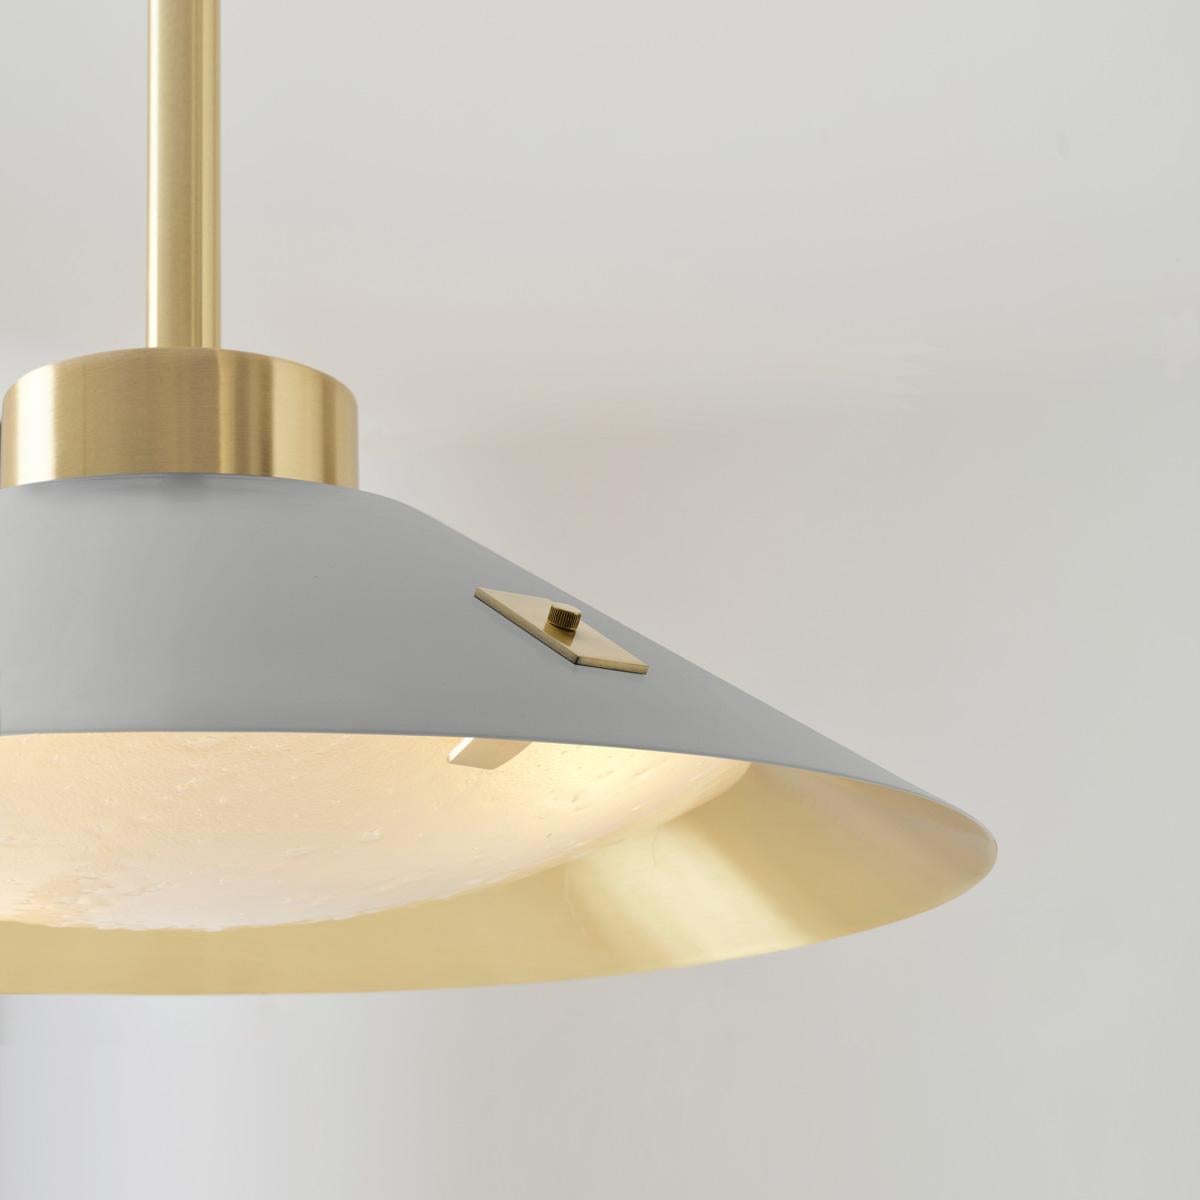 Kono Pendant by Gaspare Asaro. Satin Brass and Stone Grey For Sale 7